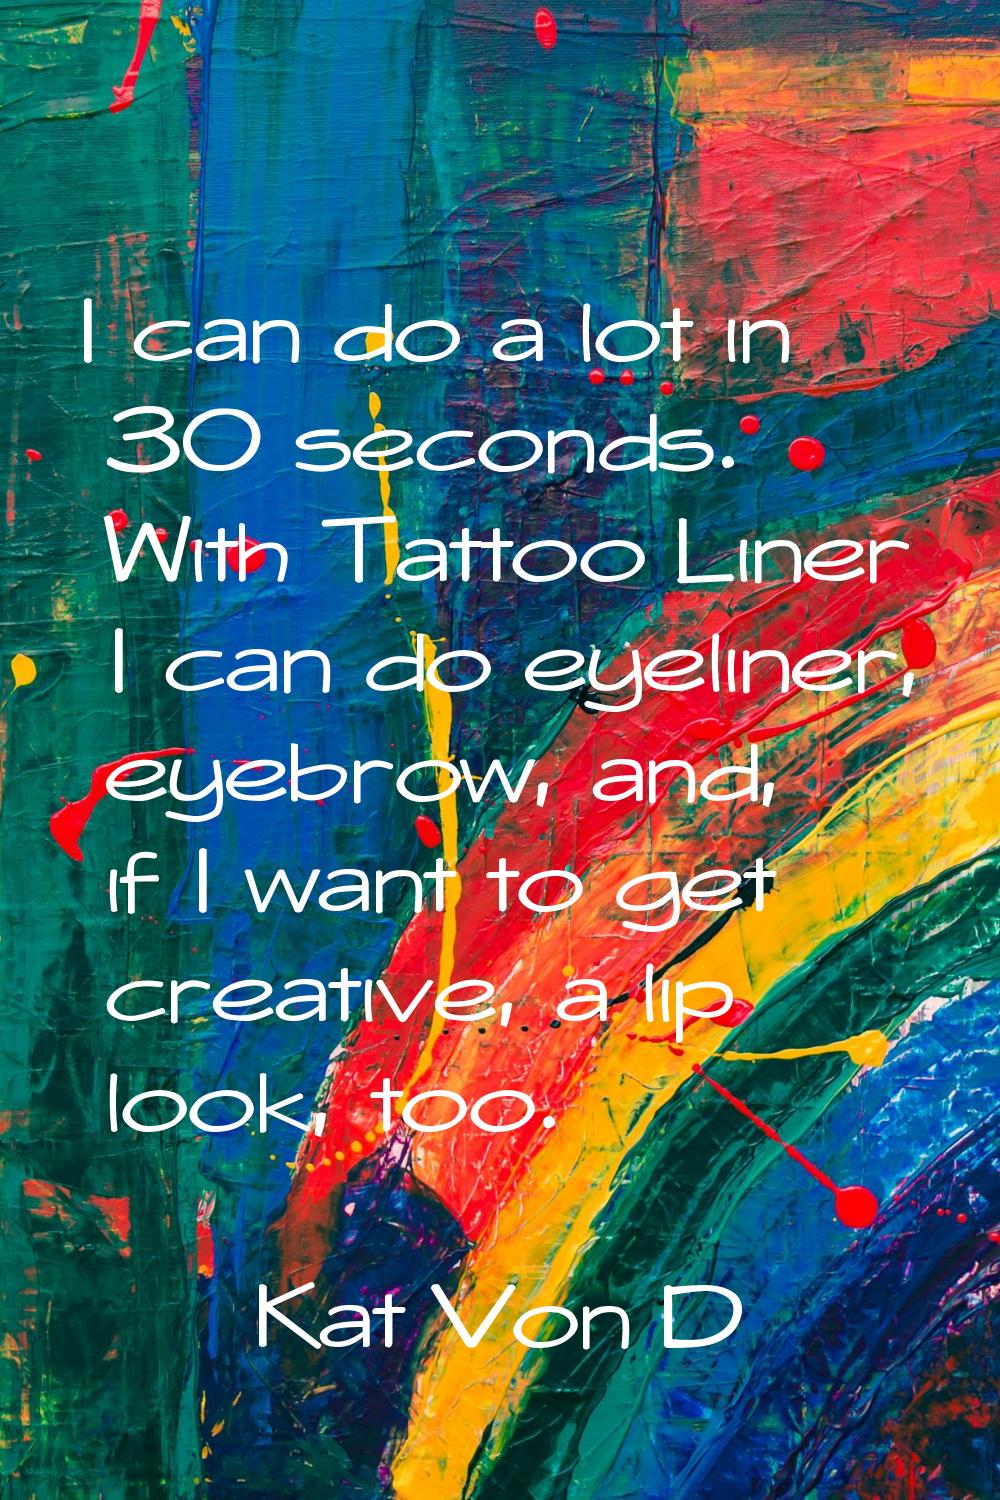 I can do a lot in 30 seconds. With Tattoo Liner I can do eyeliner, eyebrow, and, if I want to get c